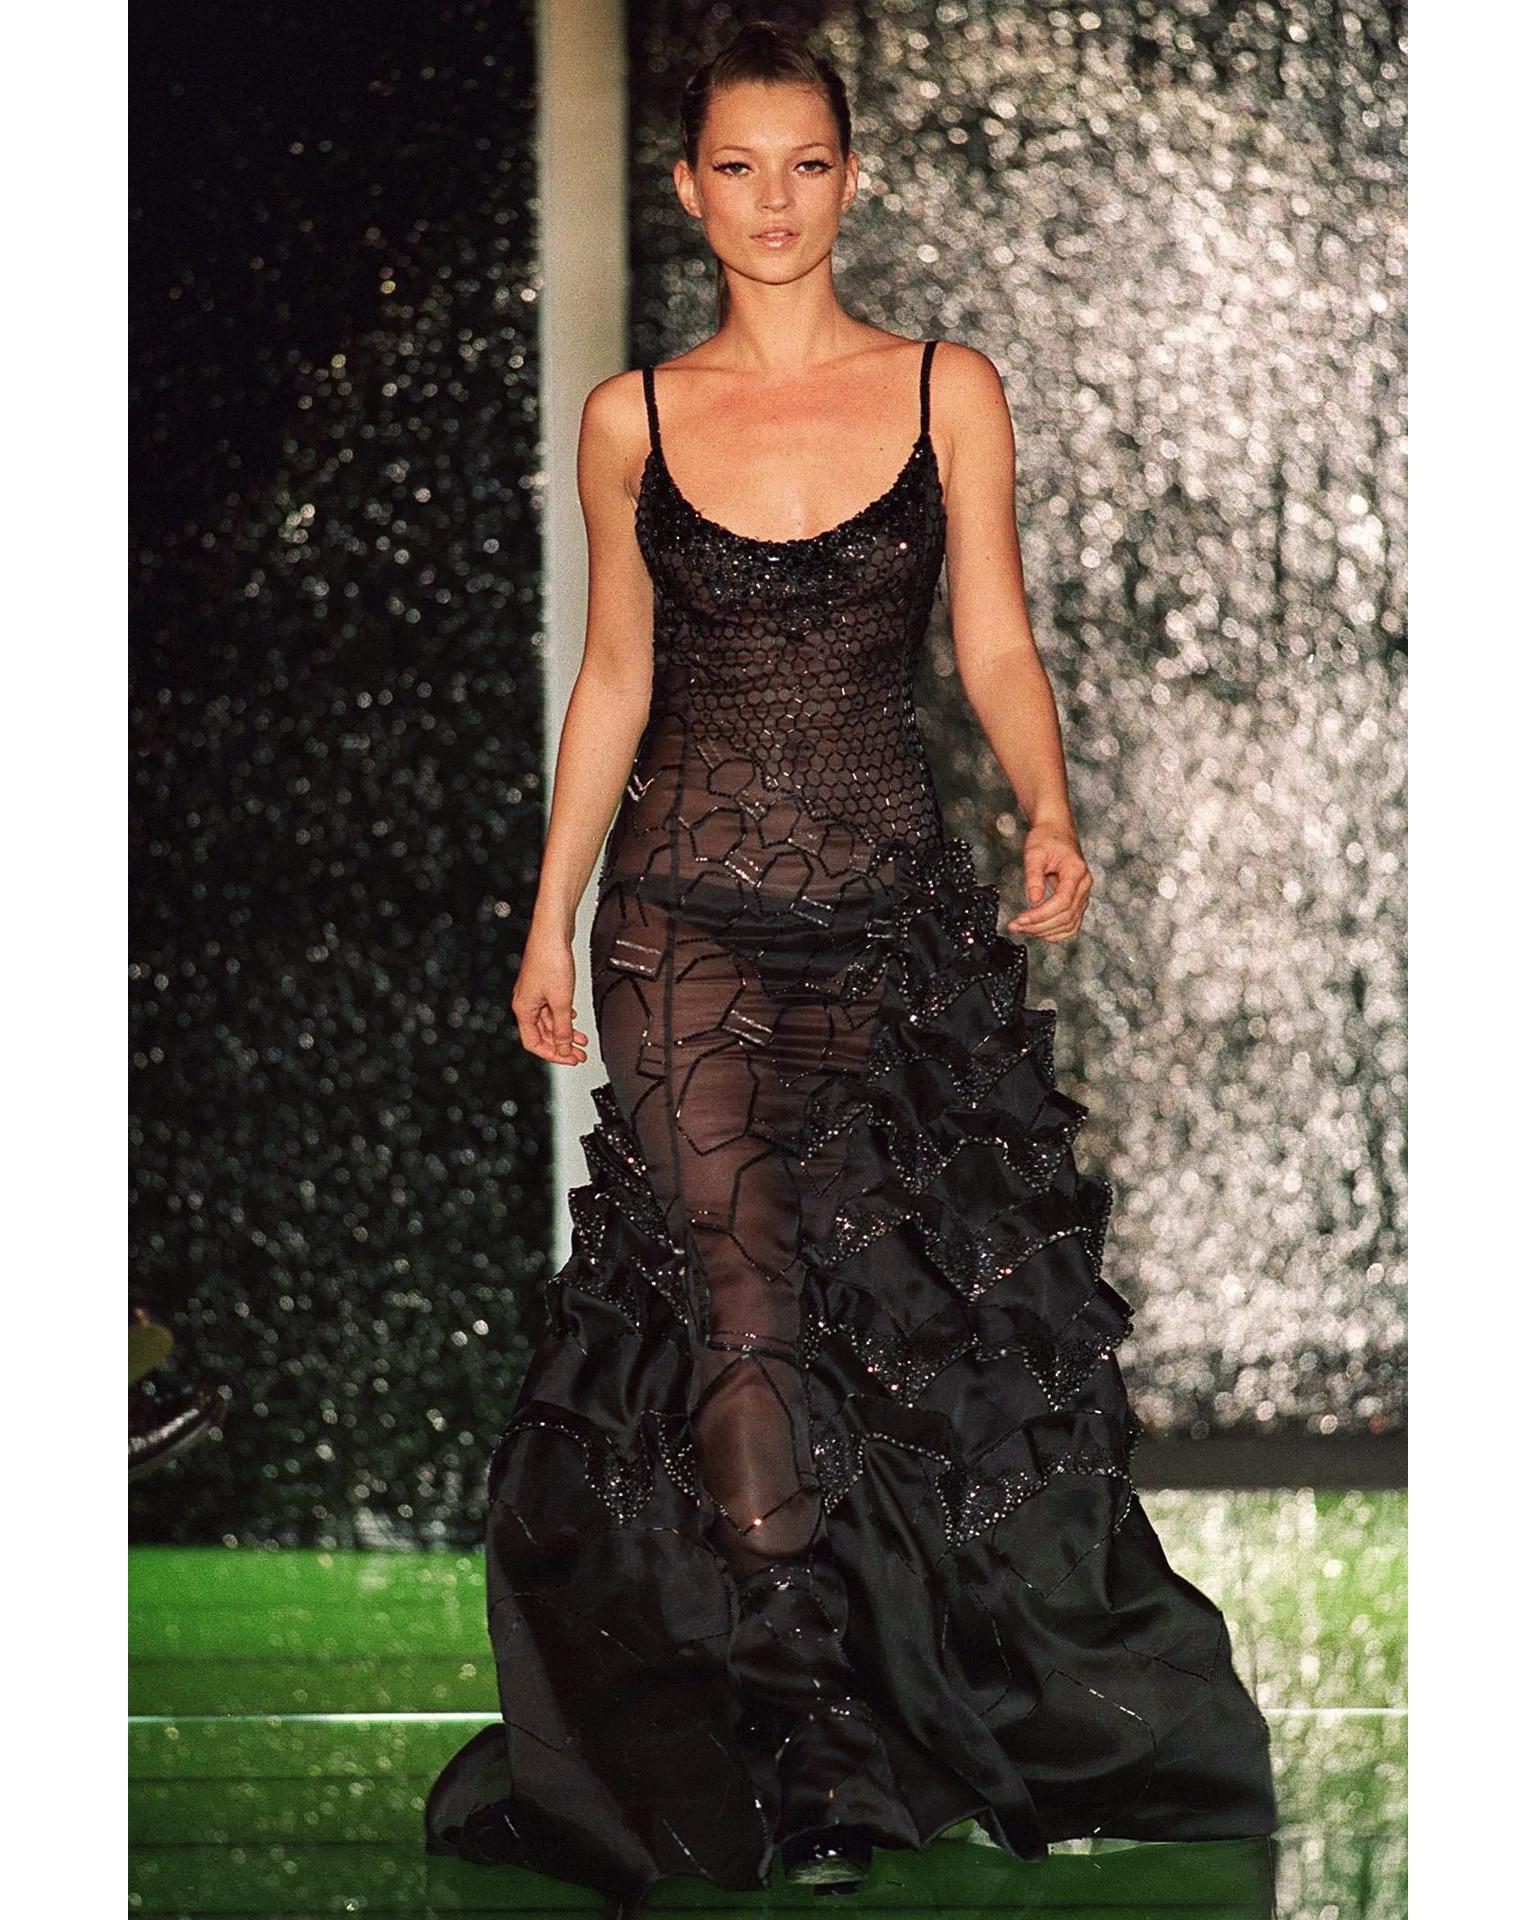 S/S 1999 Atelier Versace (Haute Couture) black embellished sculptural gown. Embellished sleeveless silk gown with honeycomb shaped embellishments at bust and 3D scalloped architecture threaded with clear and black hand-beaded embellishments